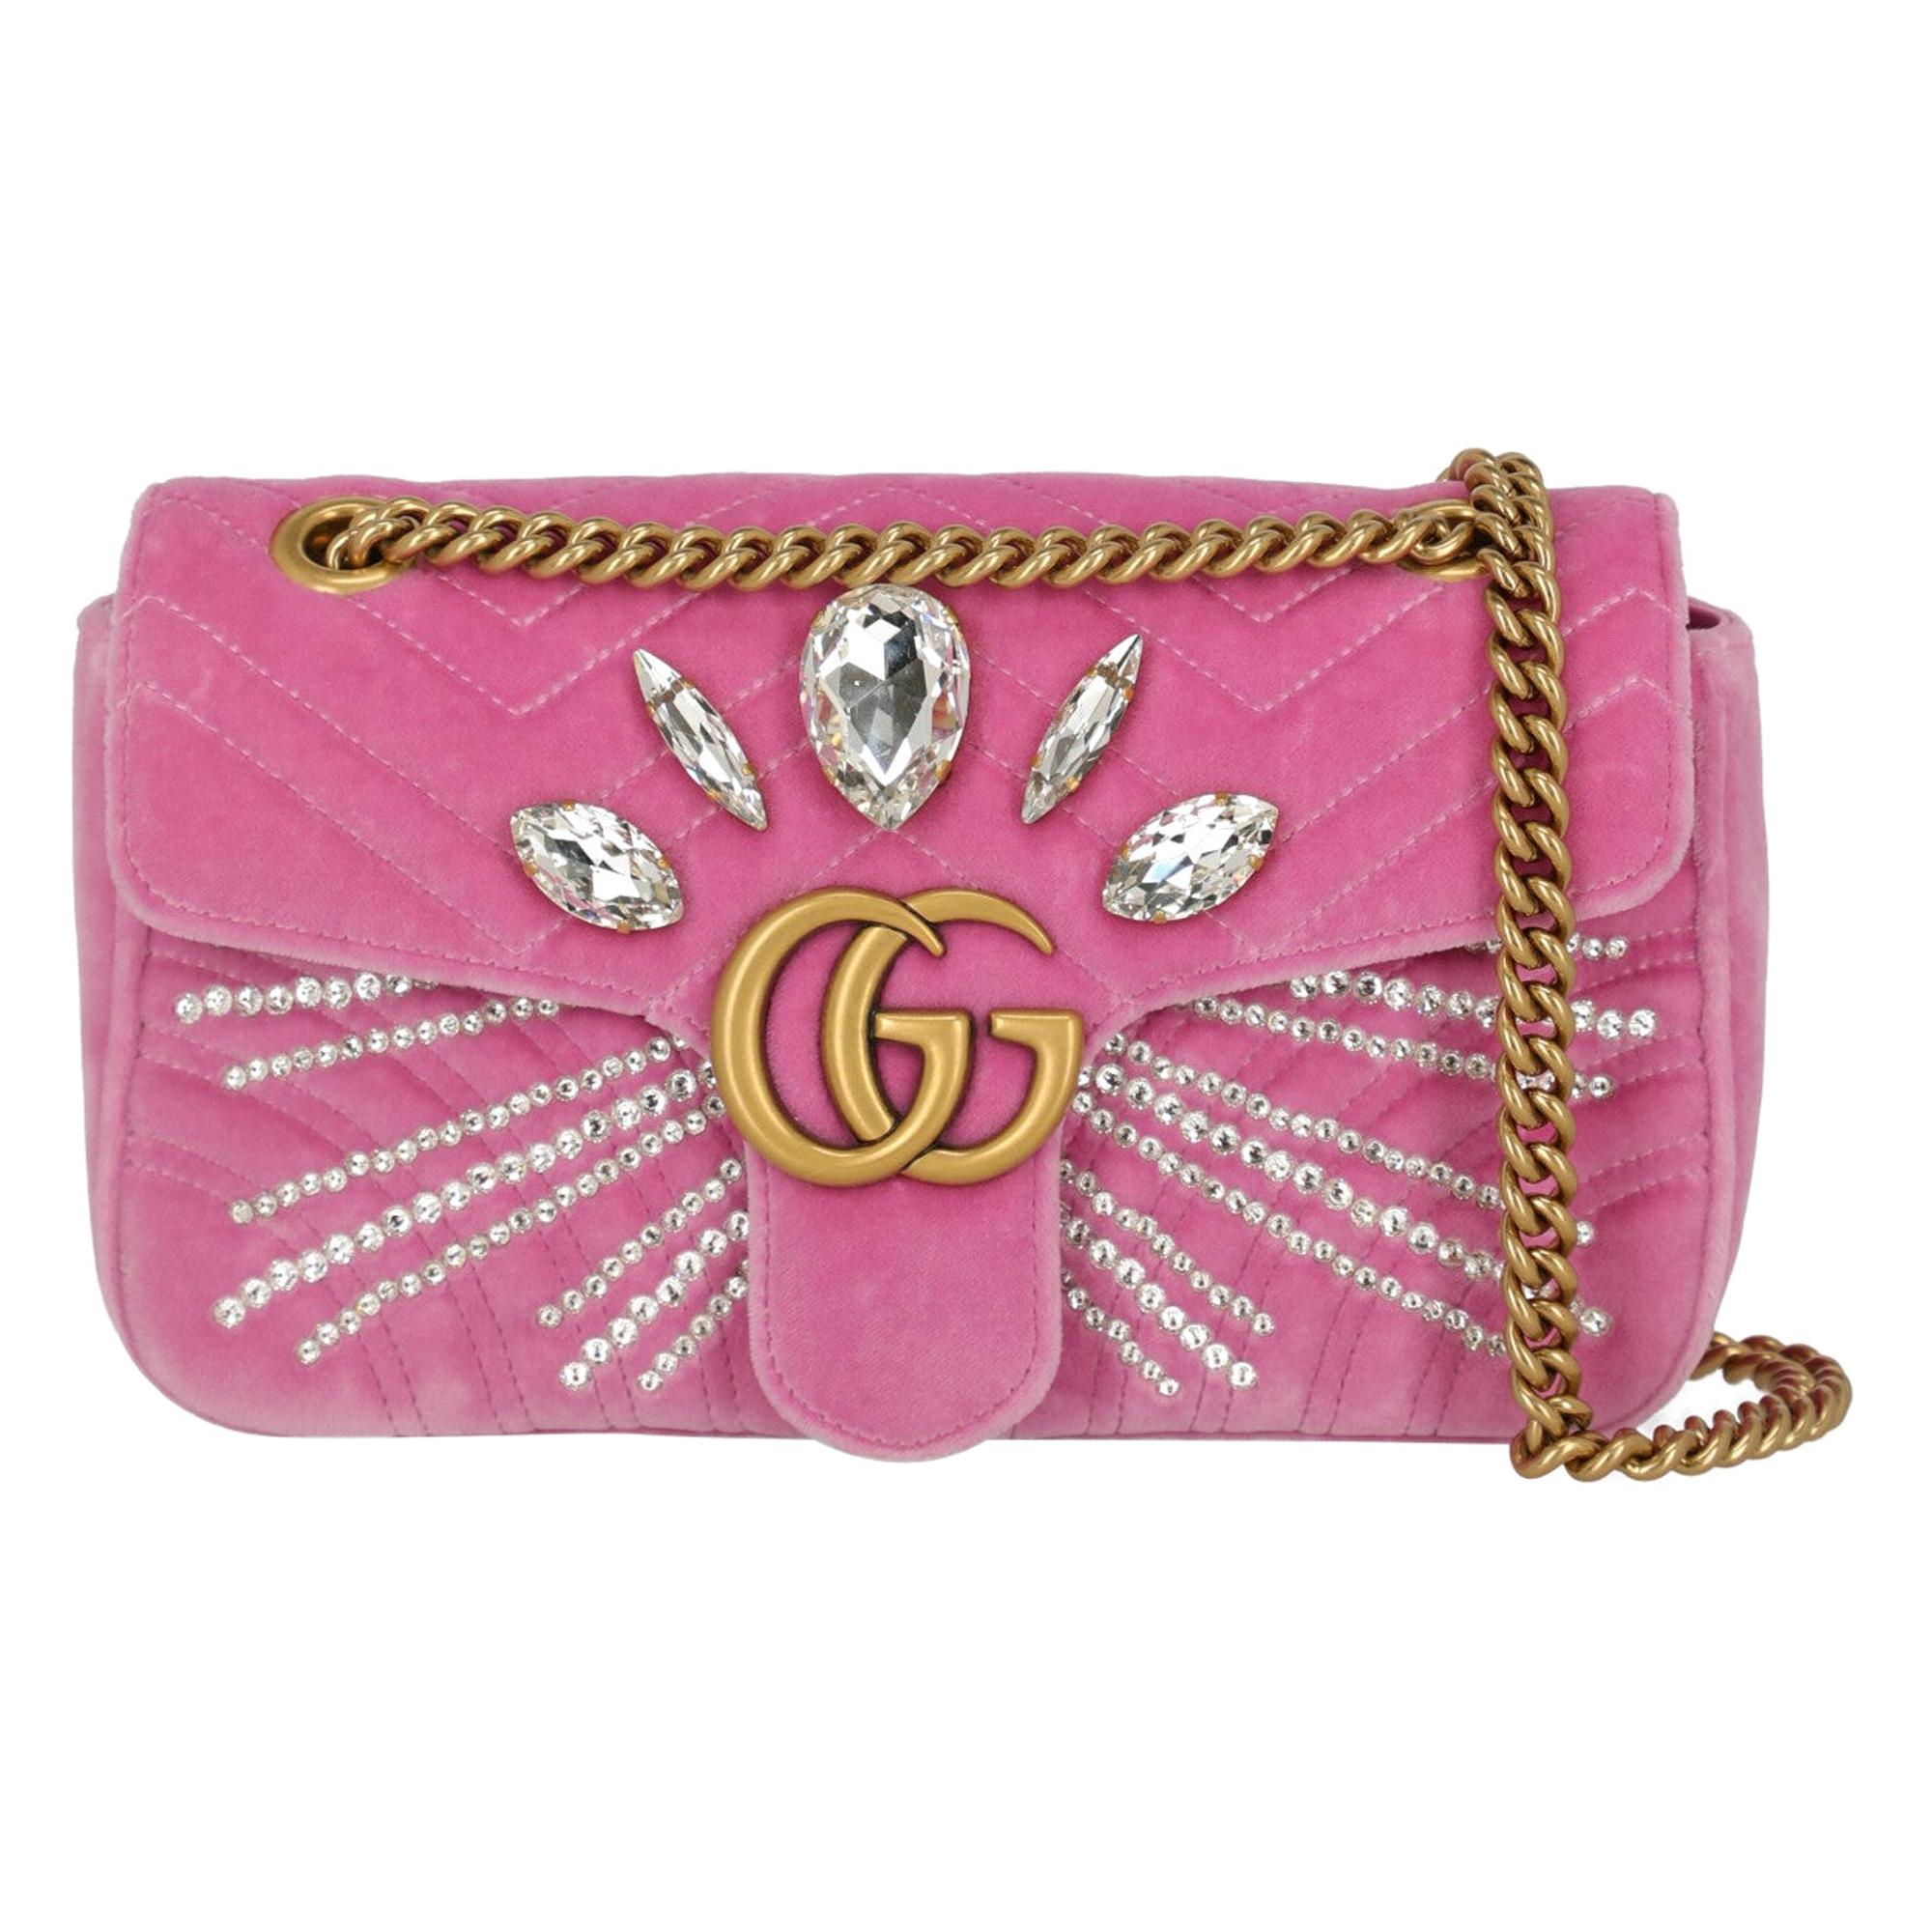 Gucci Women's Crossbody Bag Marmont Pink Leather For Sale